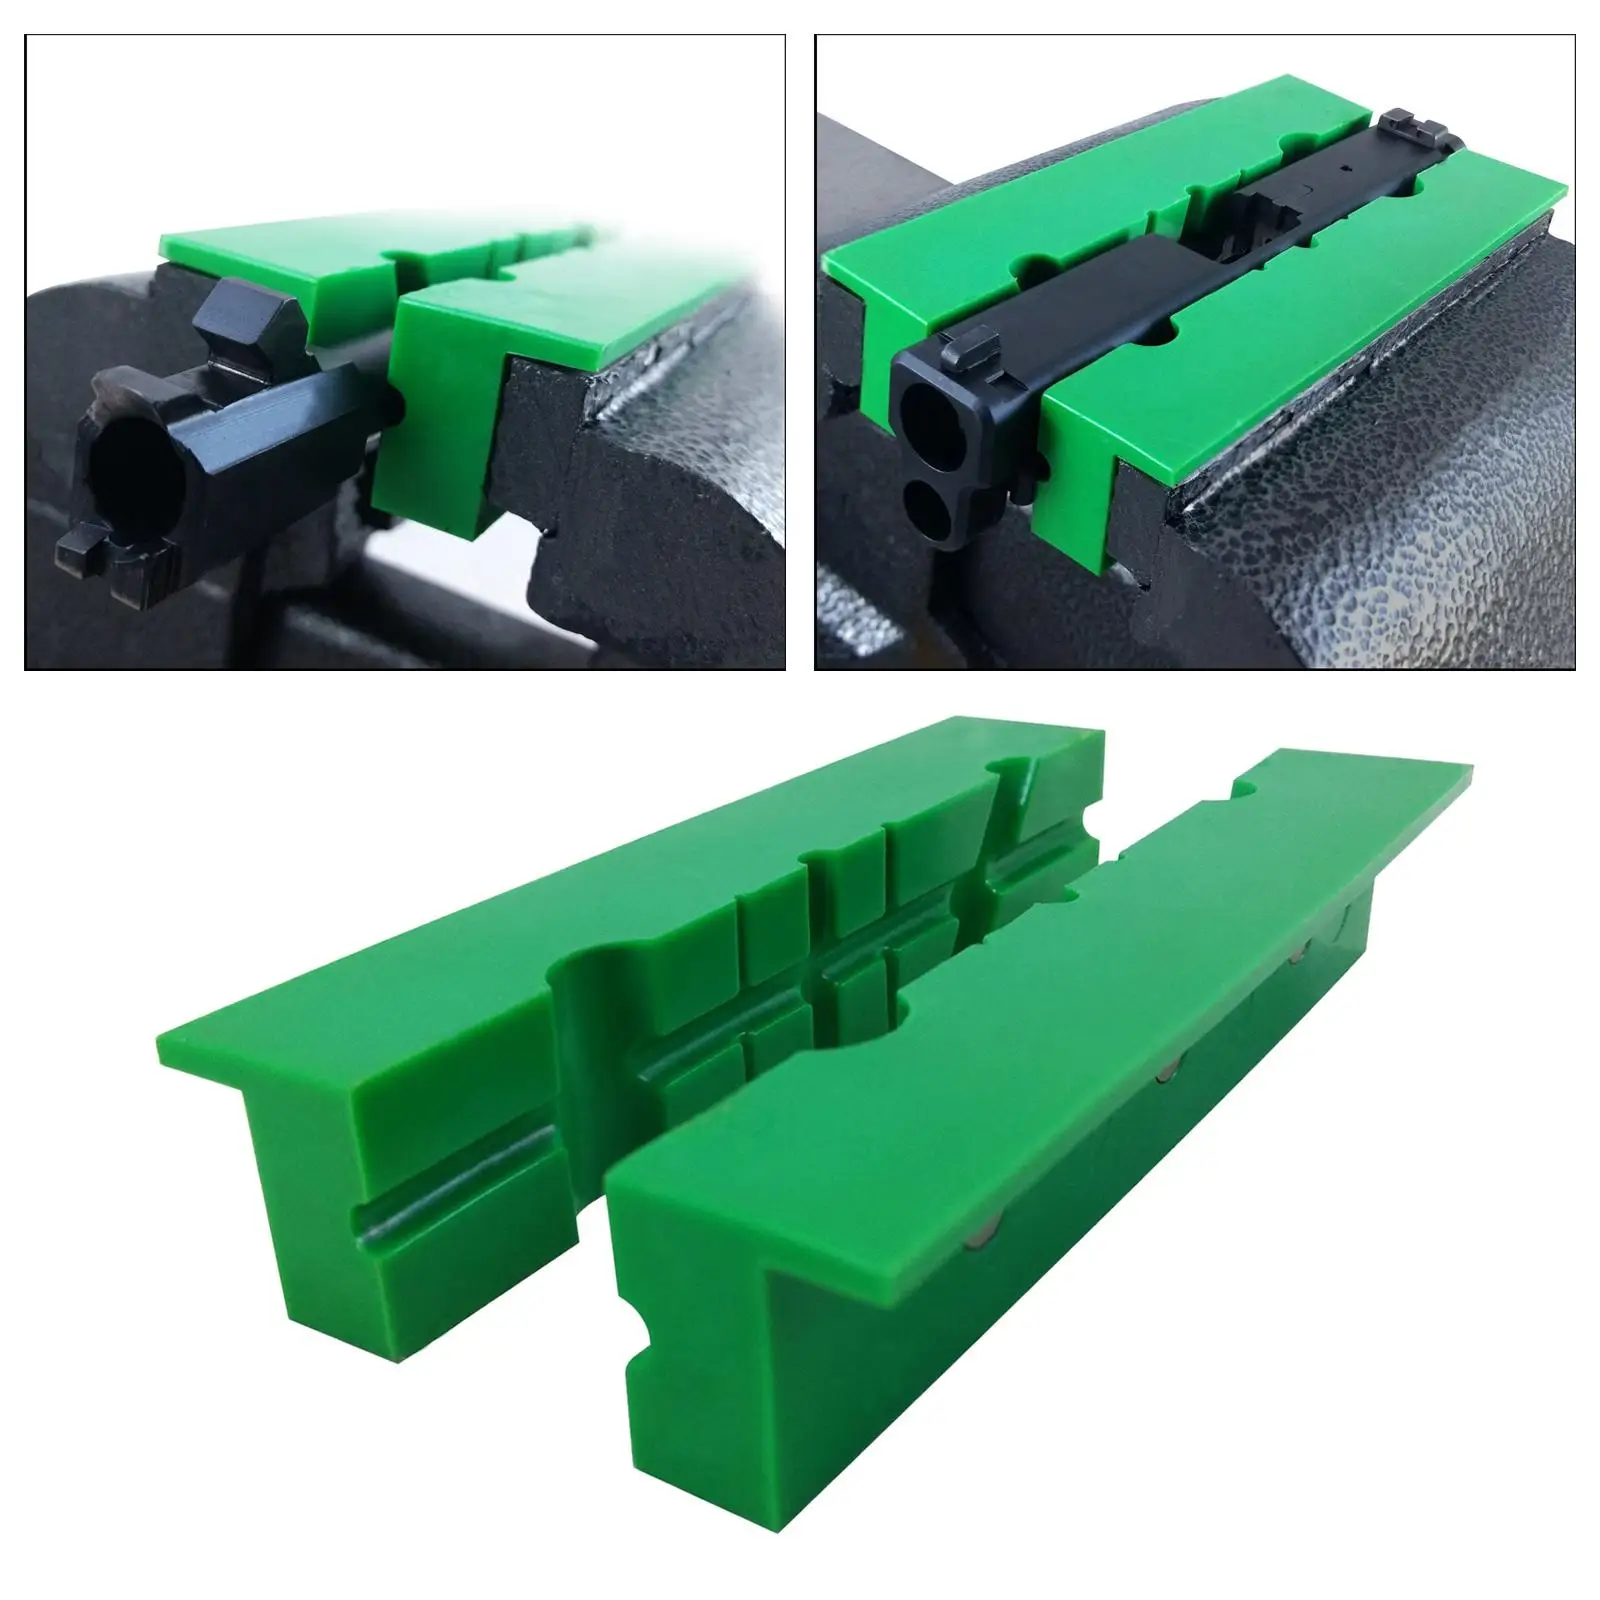 Soft Vise Jaws Pads, Vise Jaw Protection Strips, Use on Metal Bench Vise to Clamp Flat, Round or Irregular Shapes Objects